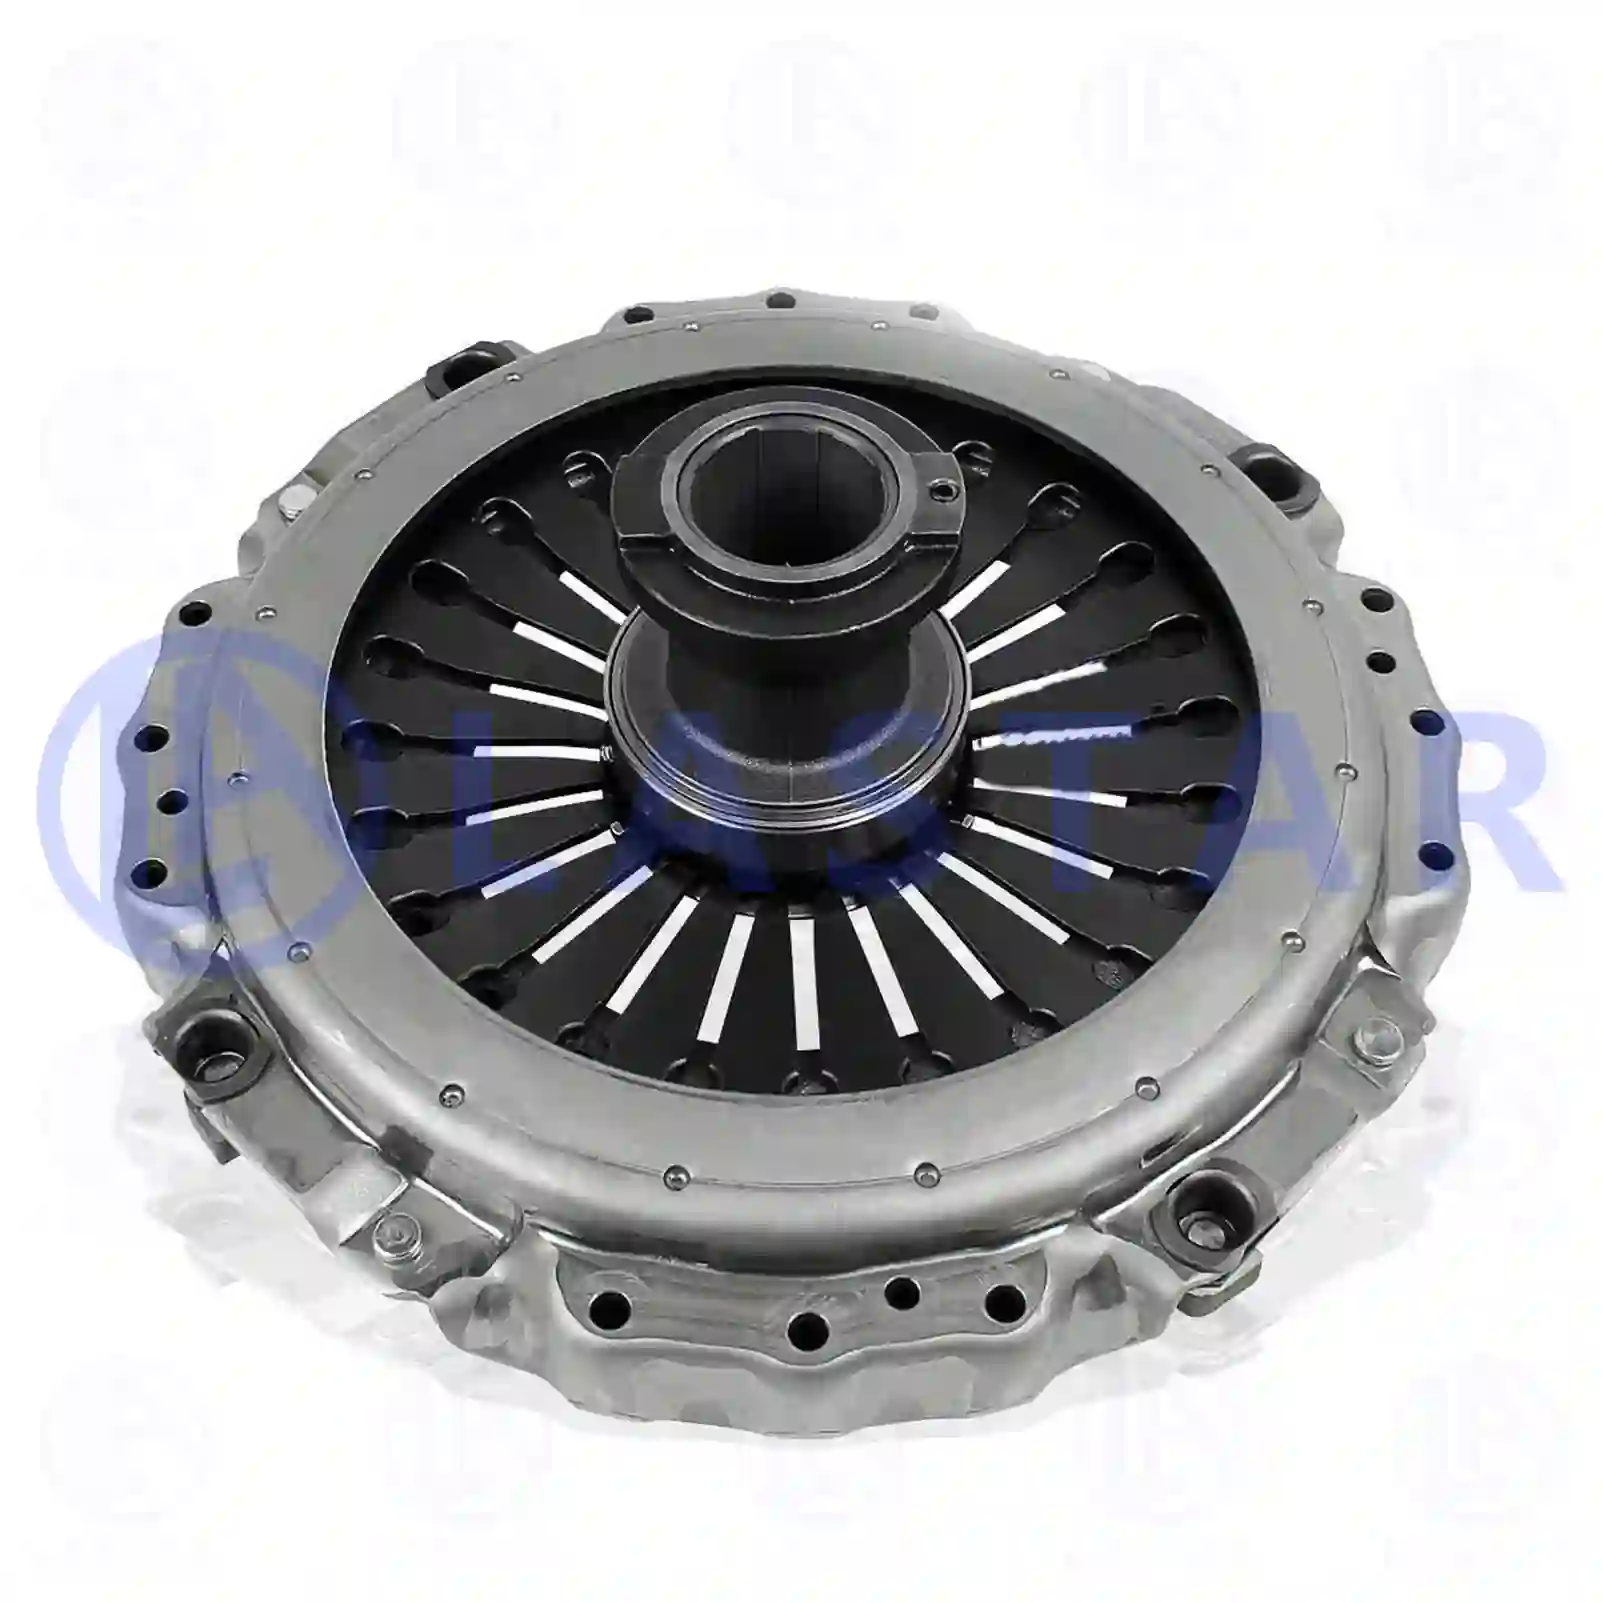 Clutch cover, with release bearing, 77722426, 0052506404, 005250640480, 0052506604, 005250660480, 0052509304, 005250930480, 0052509404, 005250940480, 0072506104, 007250610480, 0072506504, 0072507904, 0072508104, 0072509704, 0082502404, 0082503004, 0082503104, 0082504404, 0092500704, 0092500804, 0092508304, 0102500704, 0102500804, 0102501004, 0212504001, 0212504101, 0222502001, 0222505501, 0242500101, 0242500201, 0242500401, 0242507401, 0262504701, 0262506601, 442999513000 ||  77722426 Lastar Spare Part | Truck Spare Parts, Auotomotive Spare Parts Clutch cover, with release bearing, 77722426, 0052506404, 005250640480, 0052506604, 005250660480, 0052509304, 005250930480, 0052509404, 005250940480, 0072506104, 007250610480, 0072506504, 0072507904, 0072508104, 0072509704, 0082502404, 0082503004, 0082503104, 0082504404, 0092500704, 0092500804, 0092508304, 0102500704, 0102500804, 0102501004, 0212504001, 0212504101, 0222502001, 0222505501, 0242500101, 0242500201, 0242500401, 0242507401, 0262504701, 0262506601, 442999513000 ||  77722426 Lastar Spare Part | Truck Spare Parts, Auotomotive Spare Parts